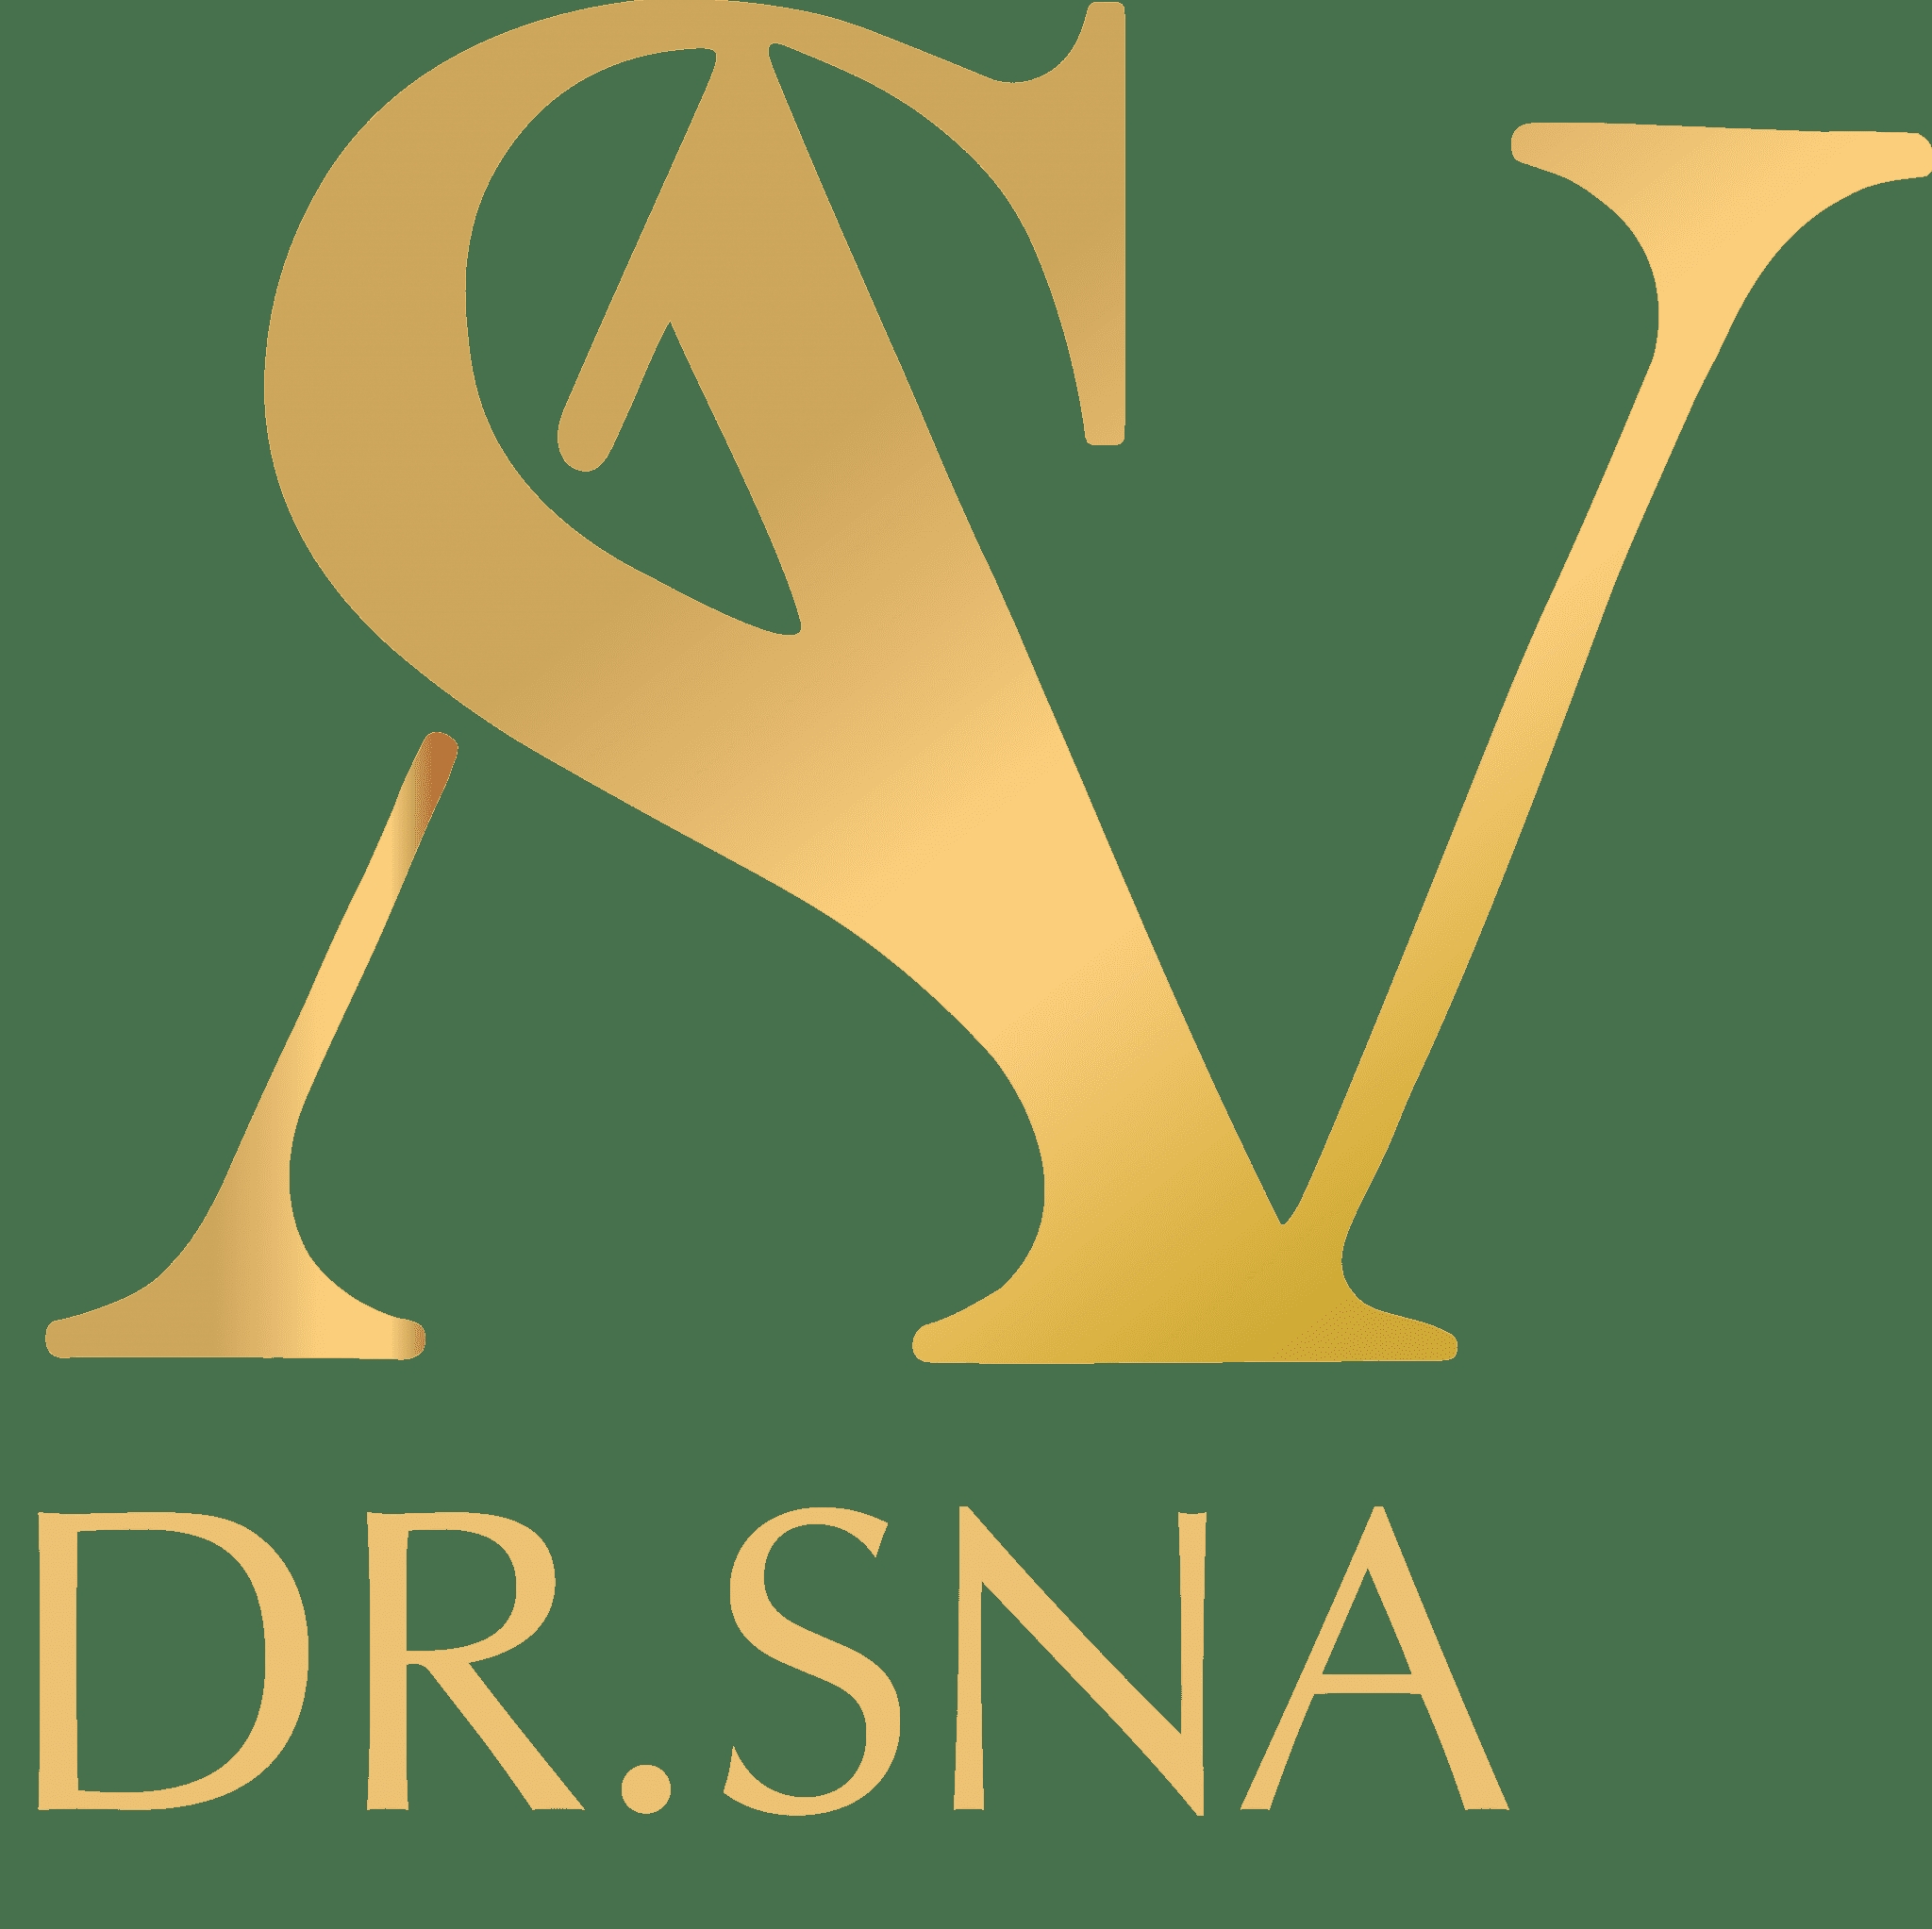 Dr. SNA Clinic